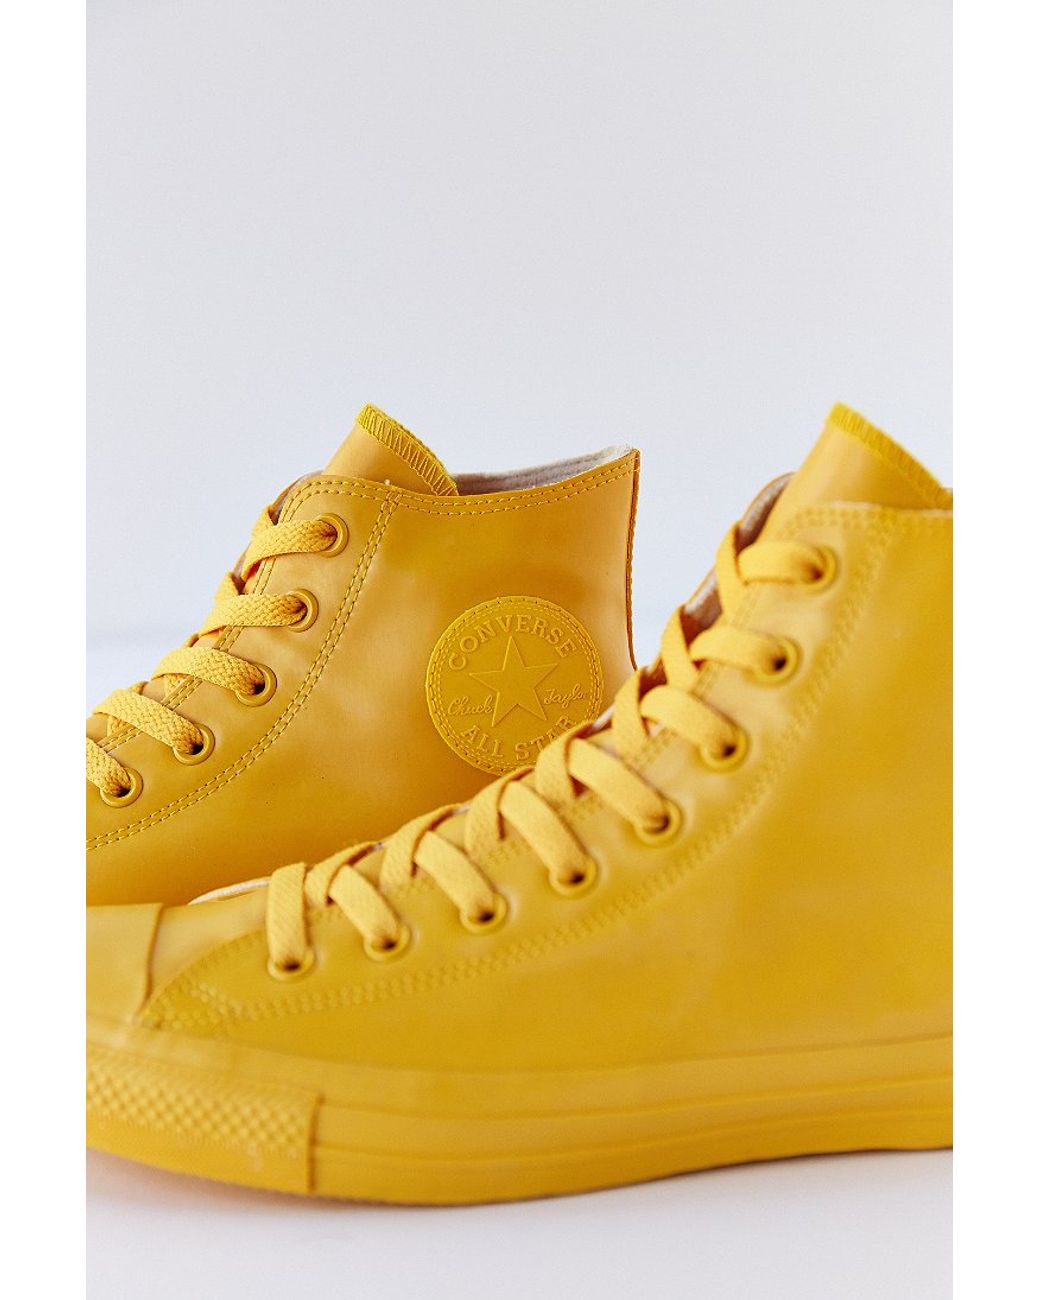 Converse Chuck Taylor All Star Rubber High-top Sneakerboot in Mustard  (Yellow) for Men | Lyst